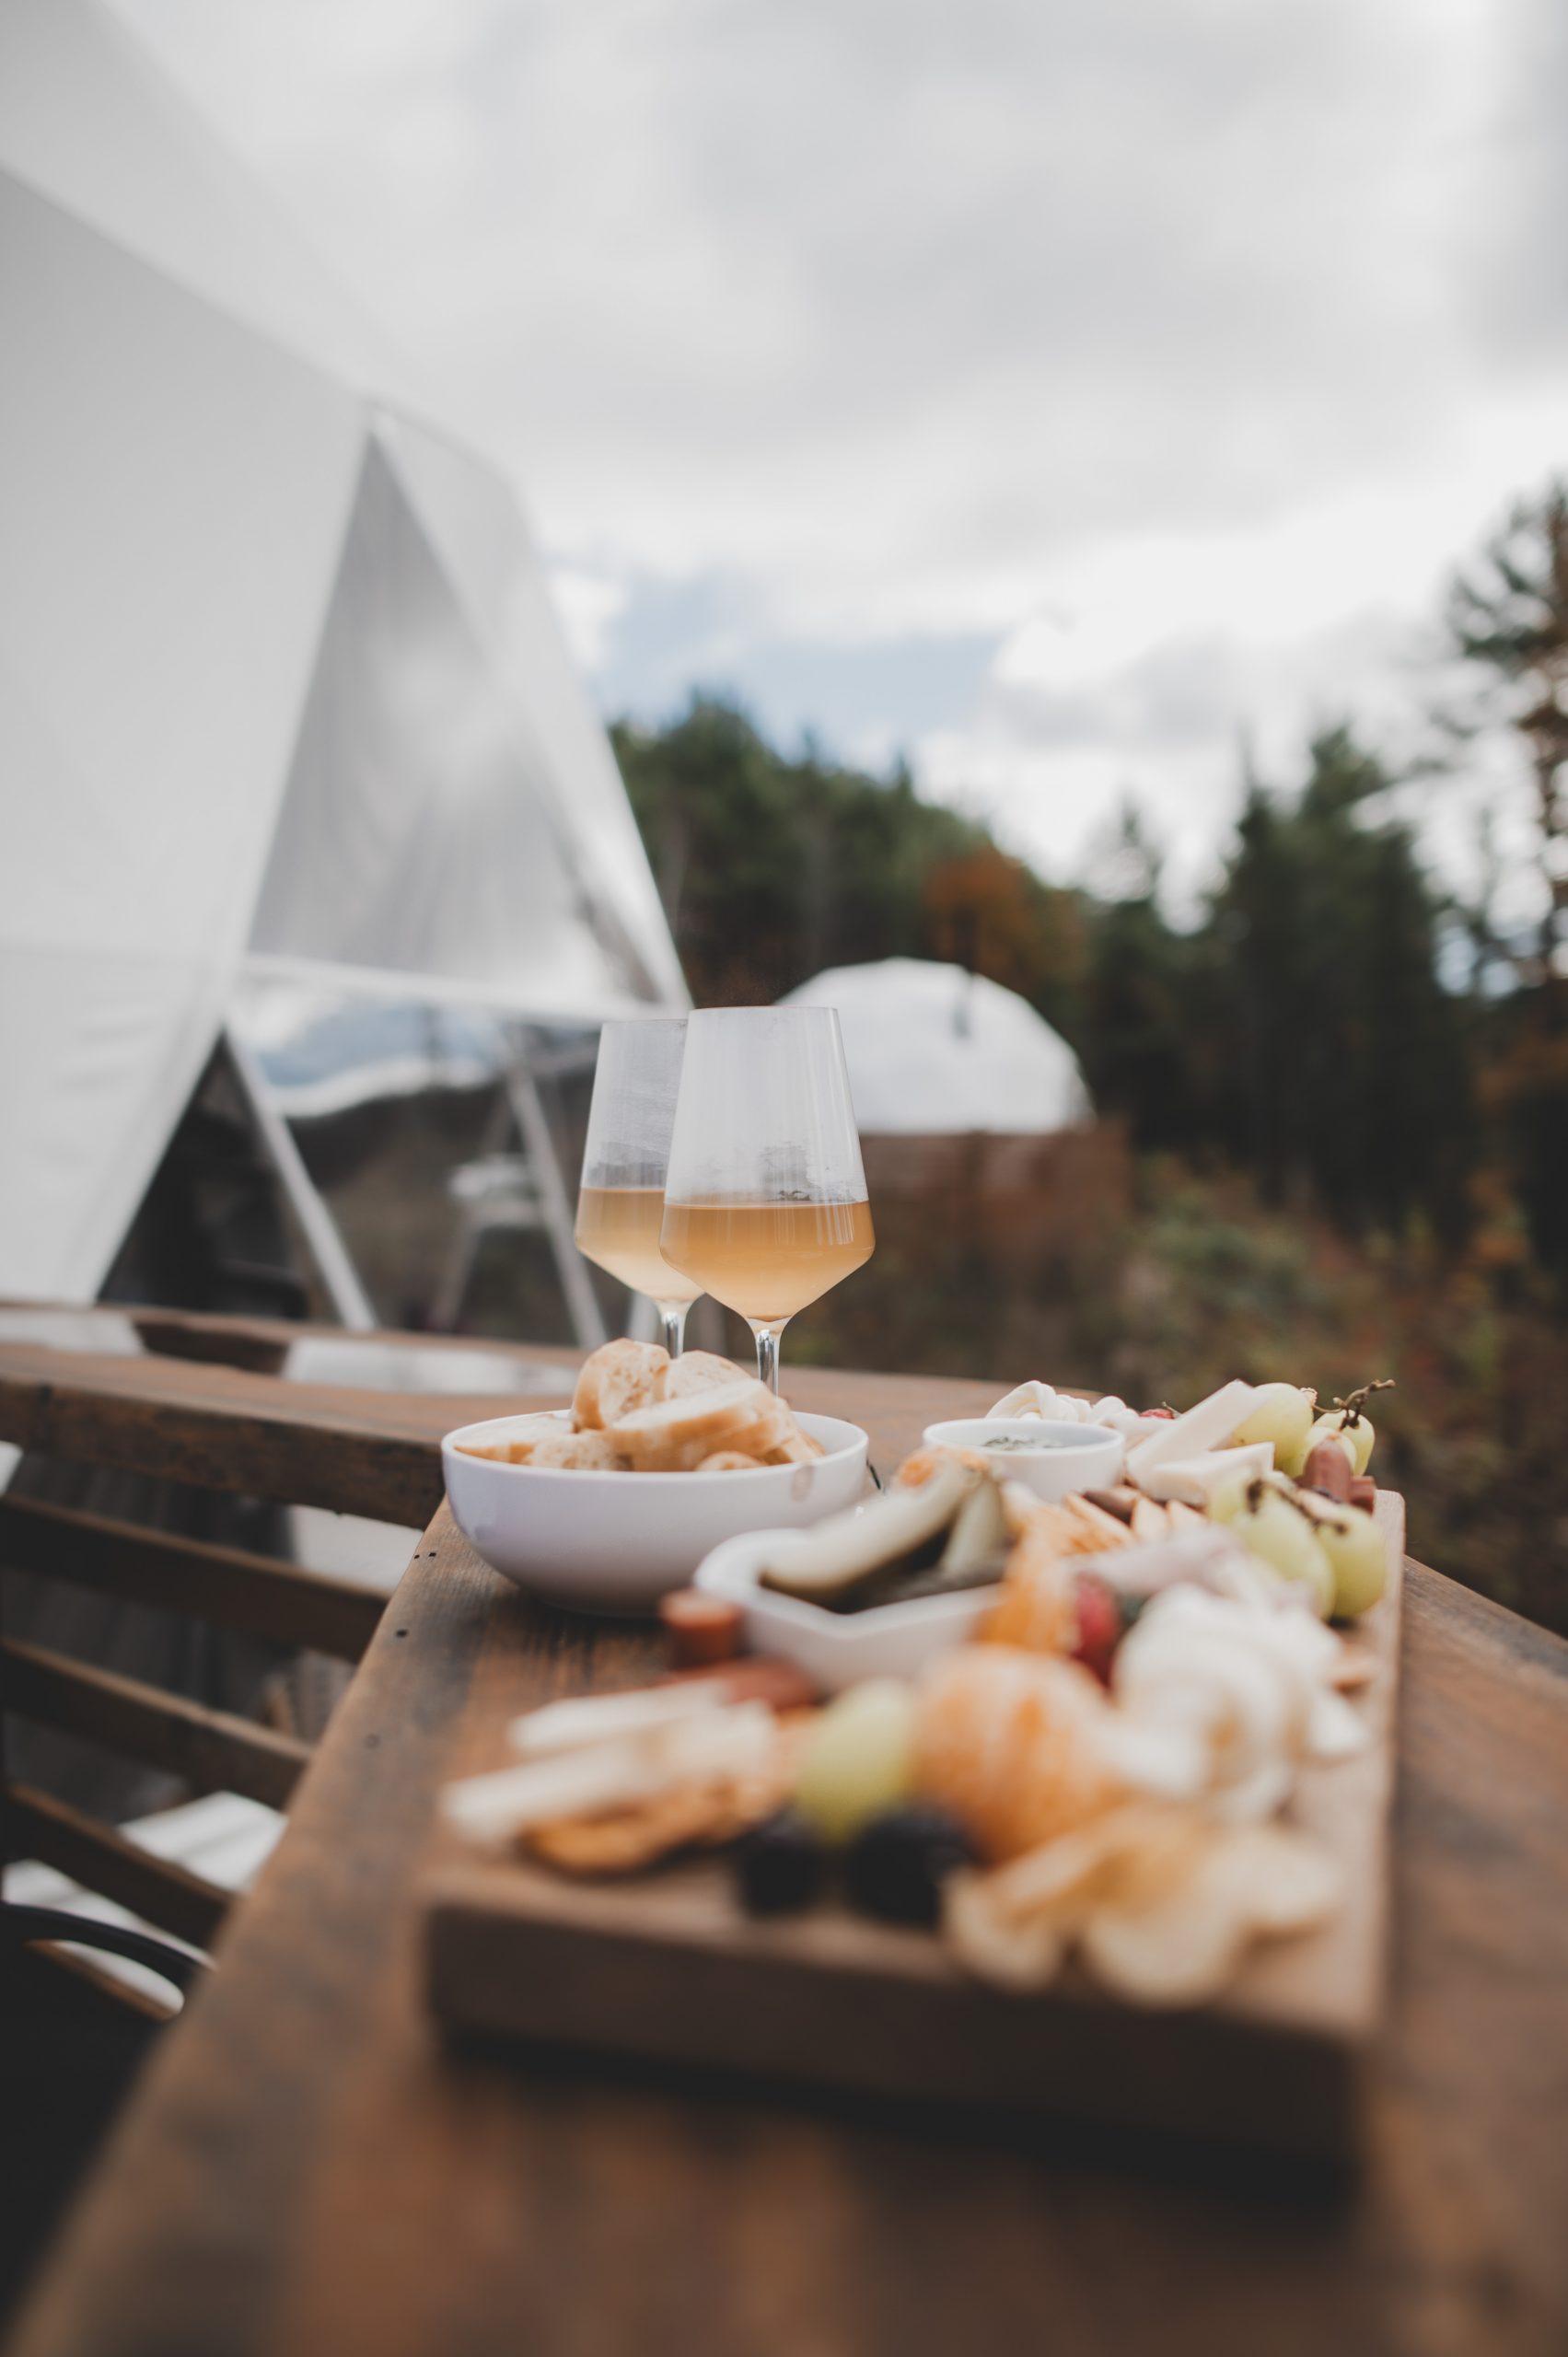 food and glasses of wine on a wooden board, with a geodesic dome in the background